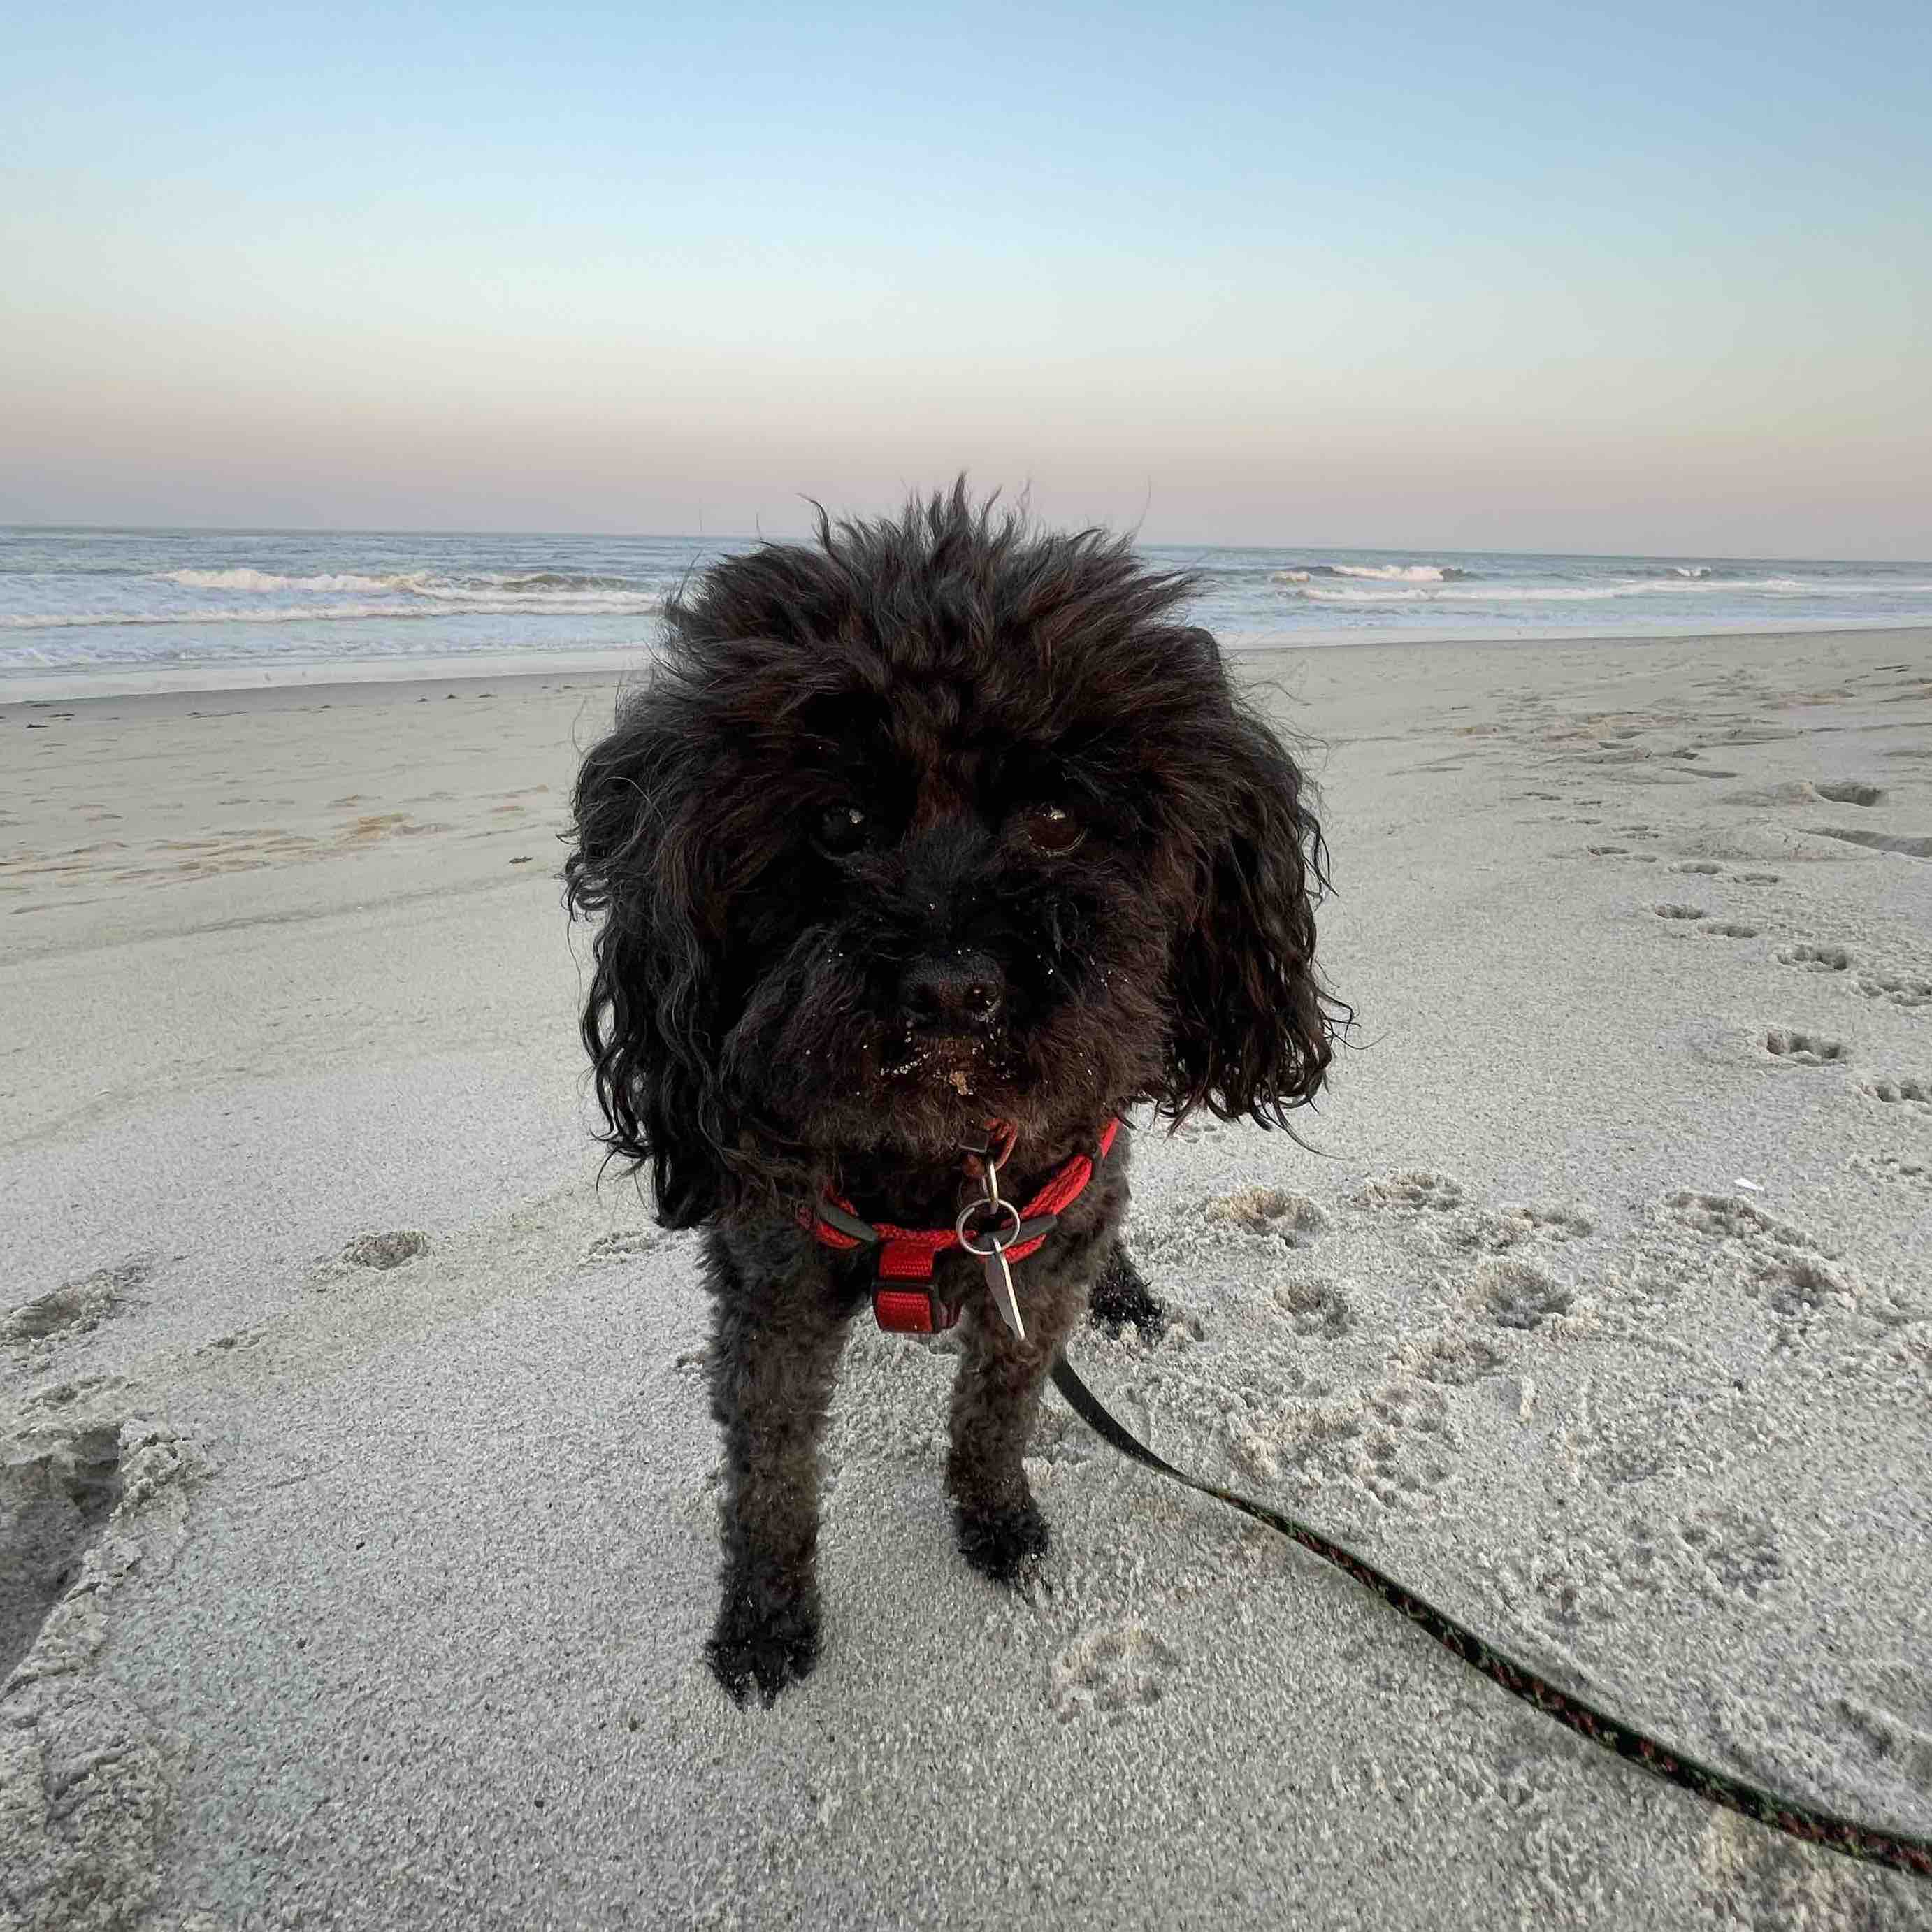 Image of Kady the poodle at Nauset Beach in Massachusetts